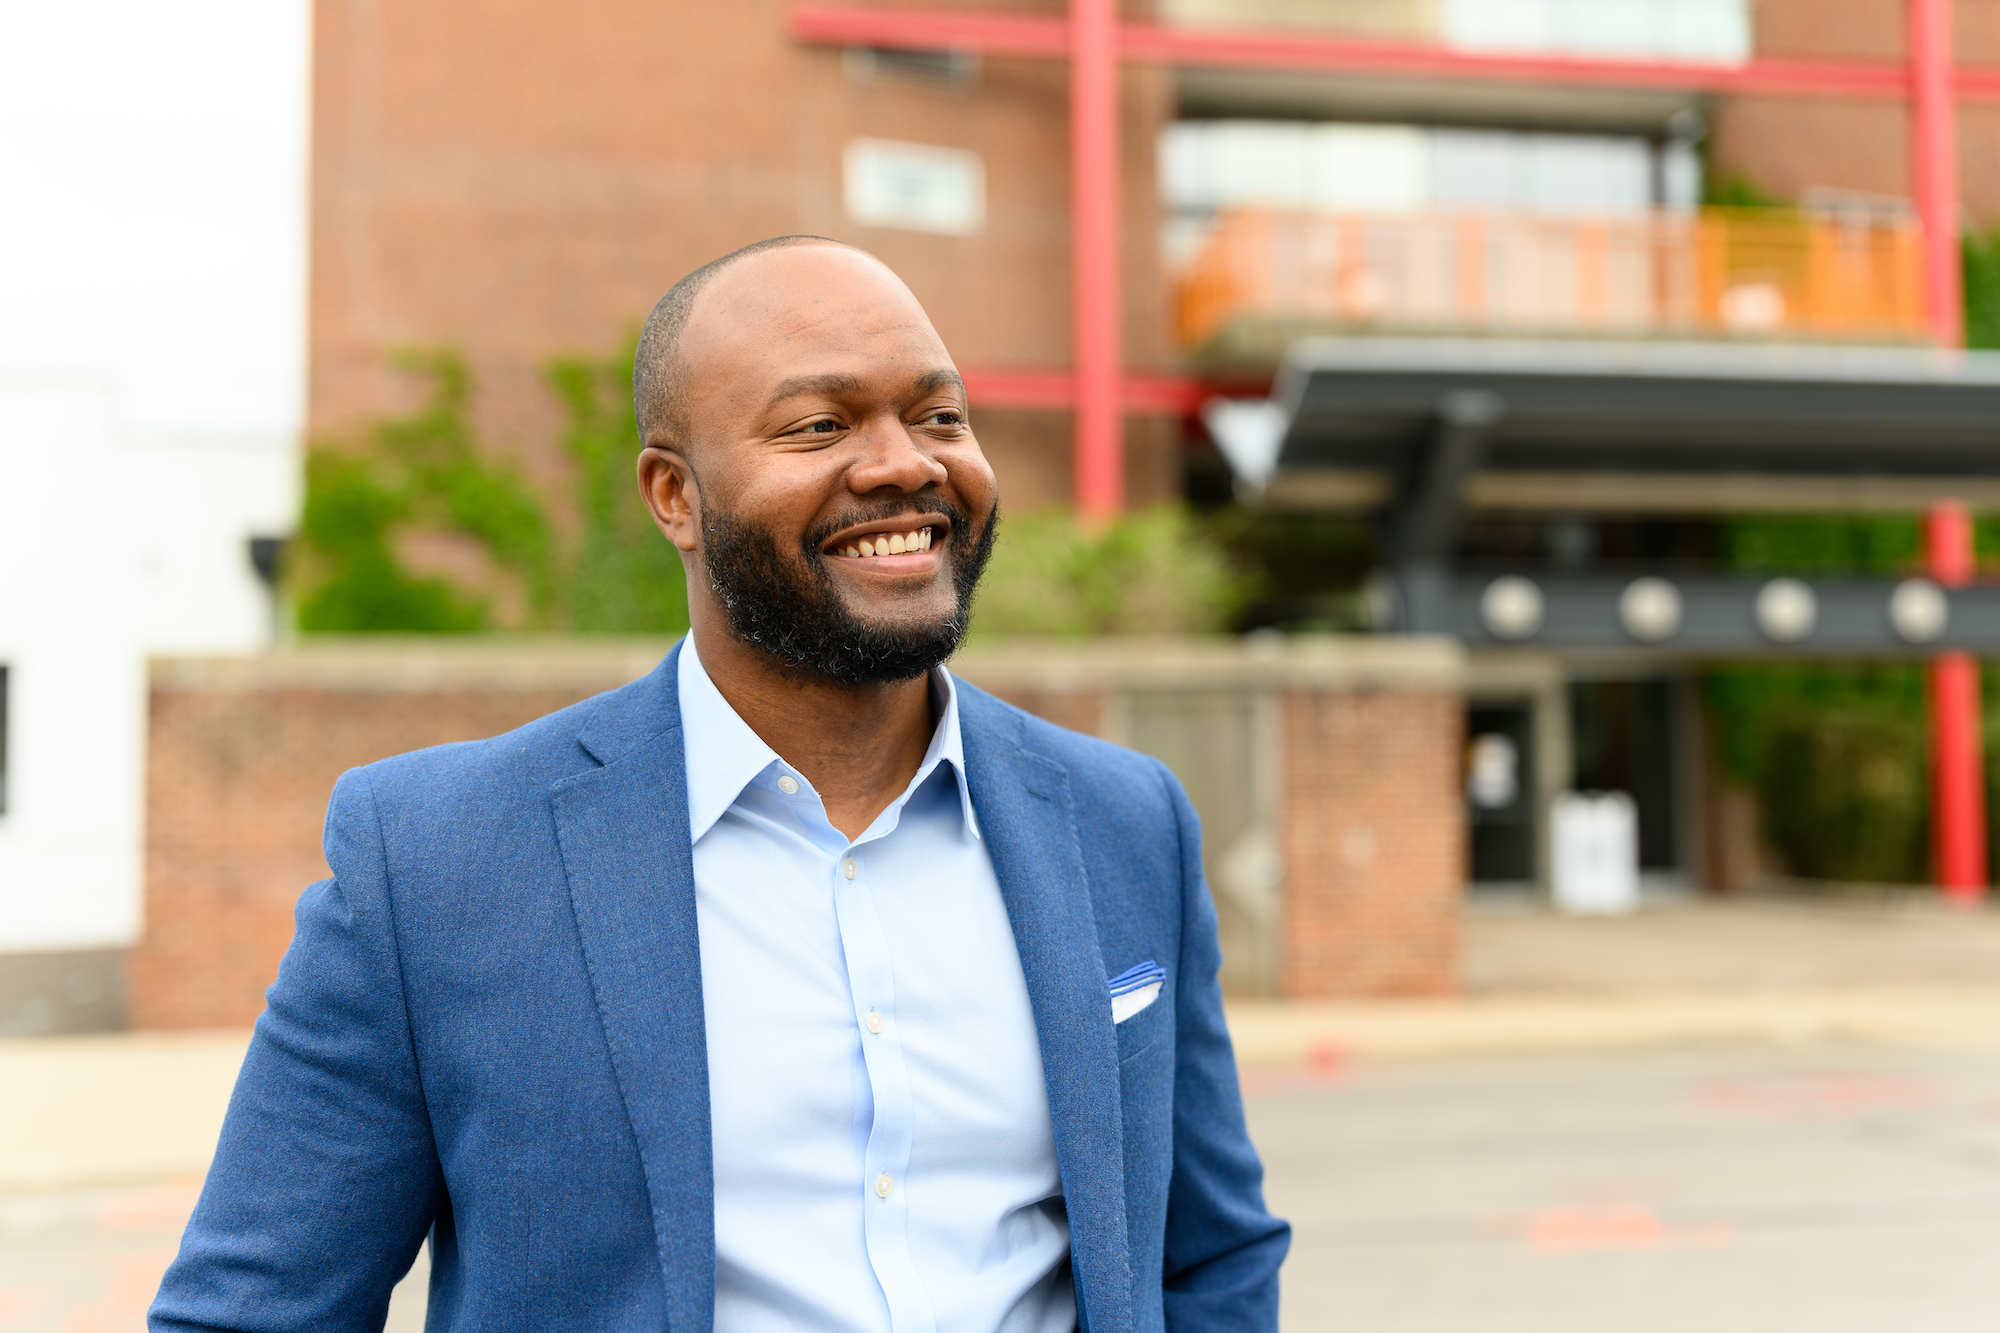 Marcus Taylor Vice President of Business Development Gray Construction BD+C 40 Under 40 class of 2022 winner